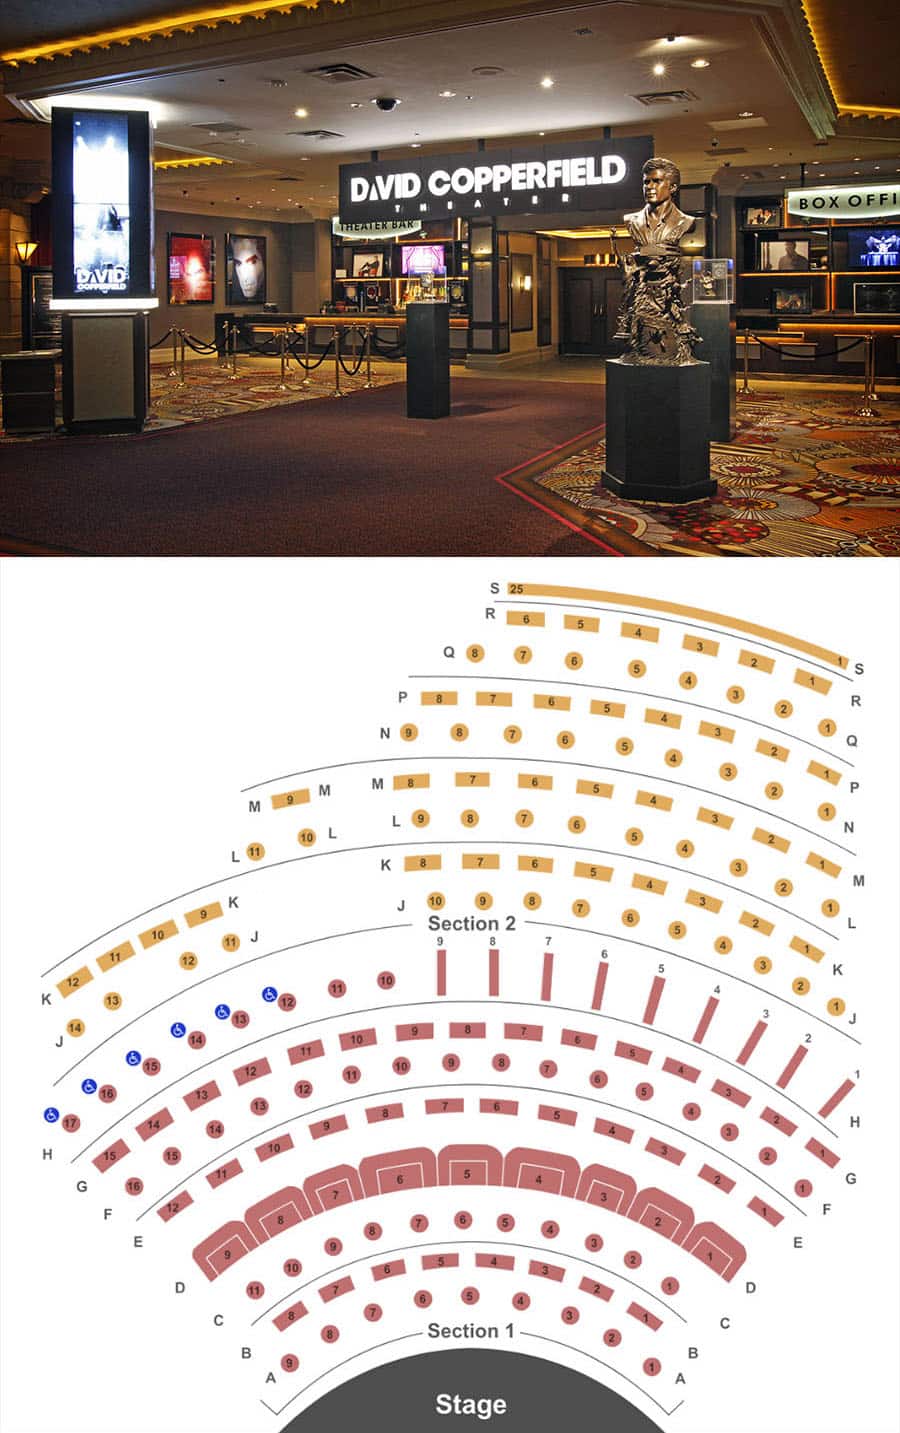 David-Copperfield-Theatre-seating-chart